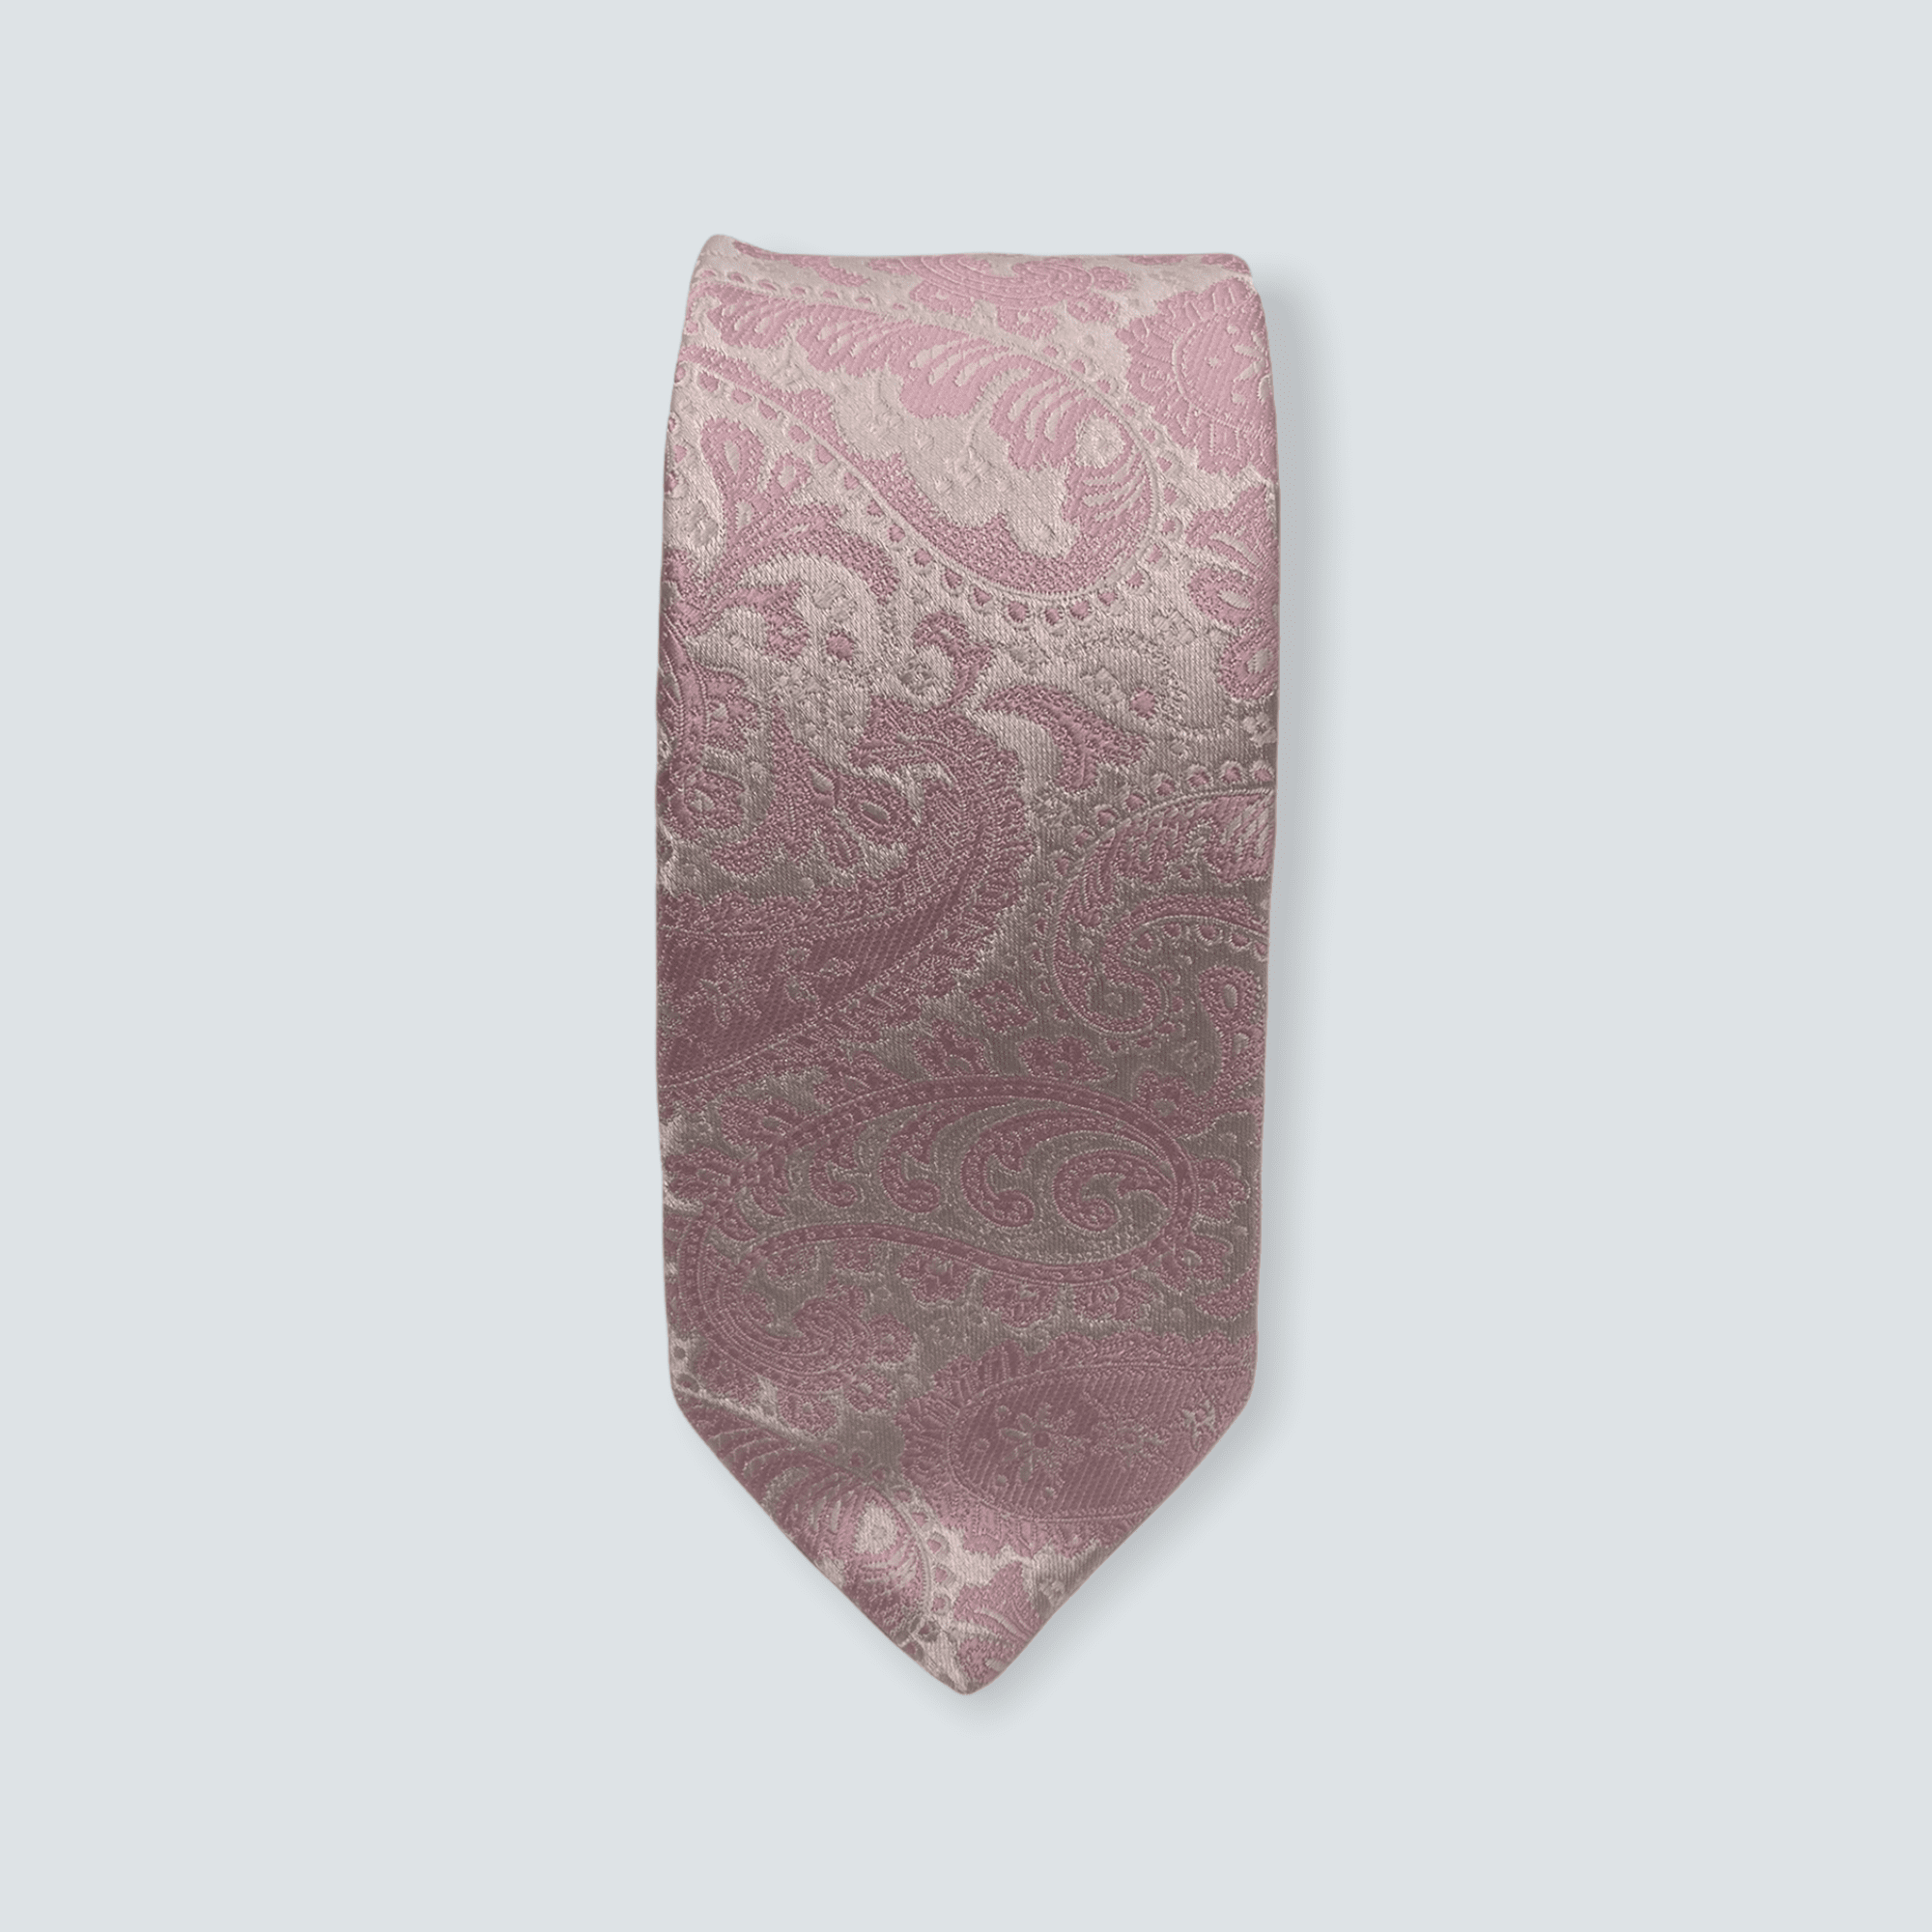 Blush Pink Paisley Tie With Pocket Square